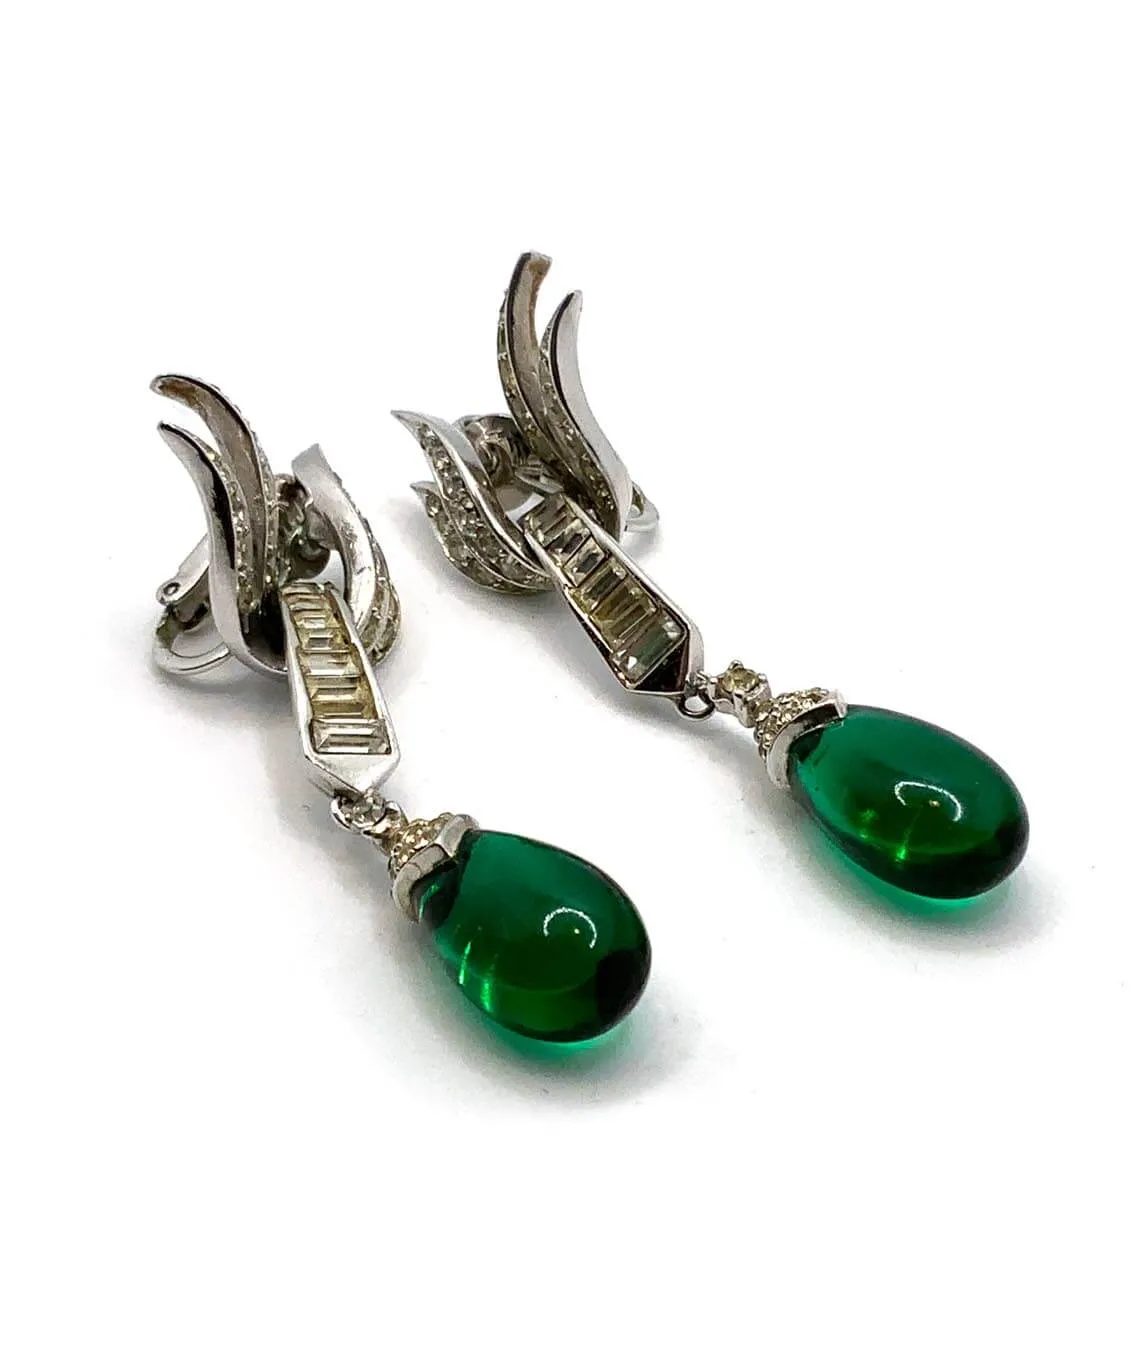 Vintage Marcel Boucher Green and silver earrings